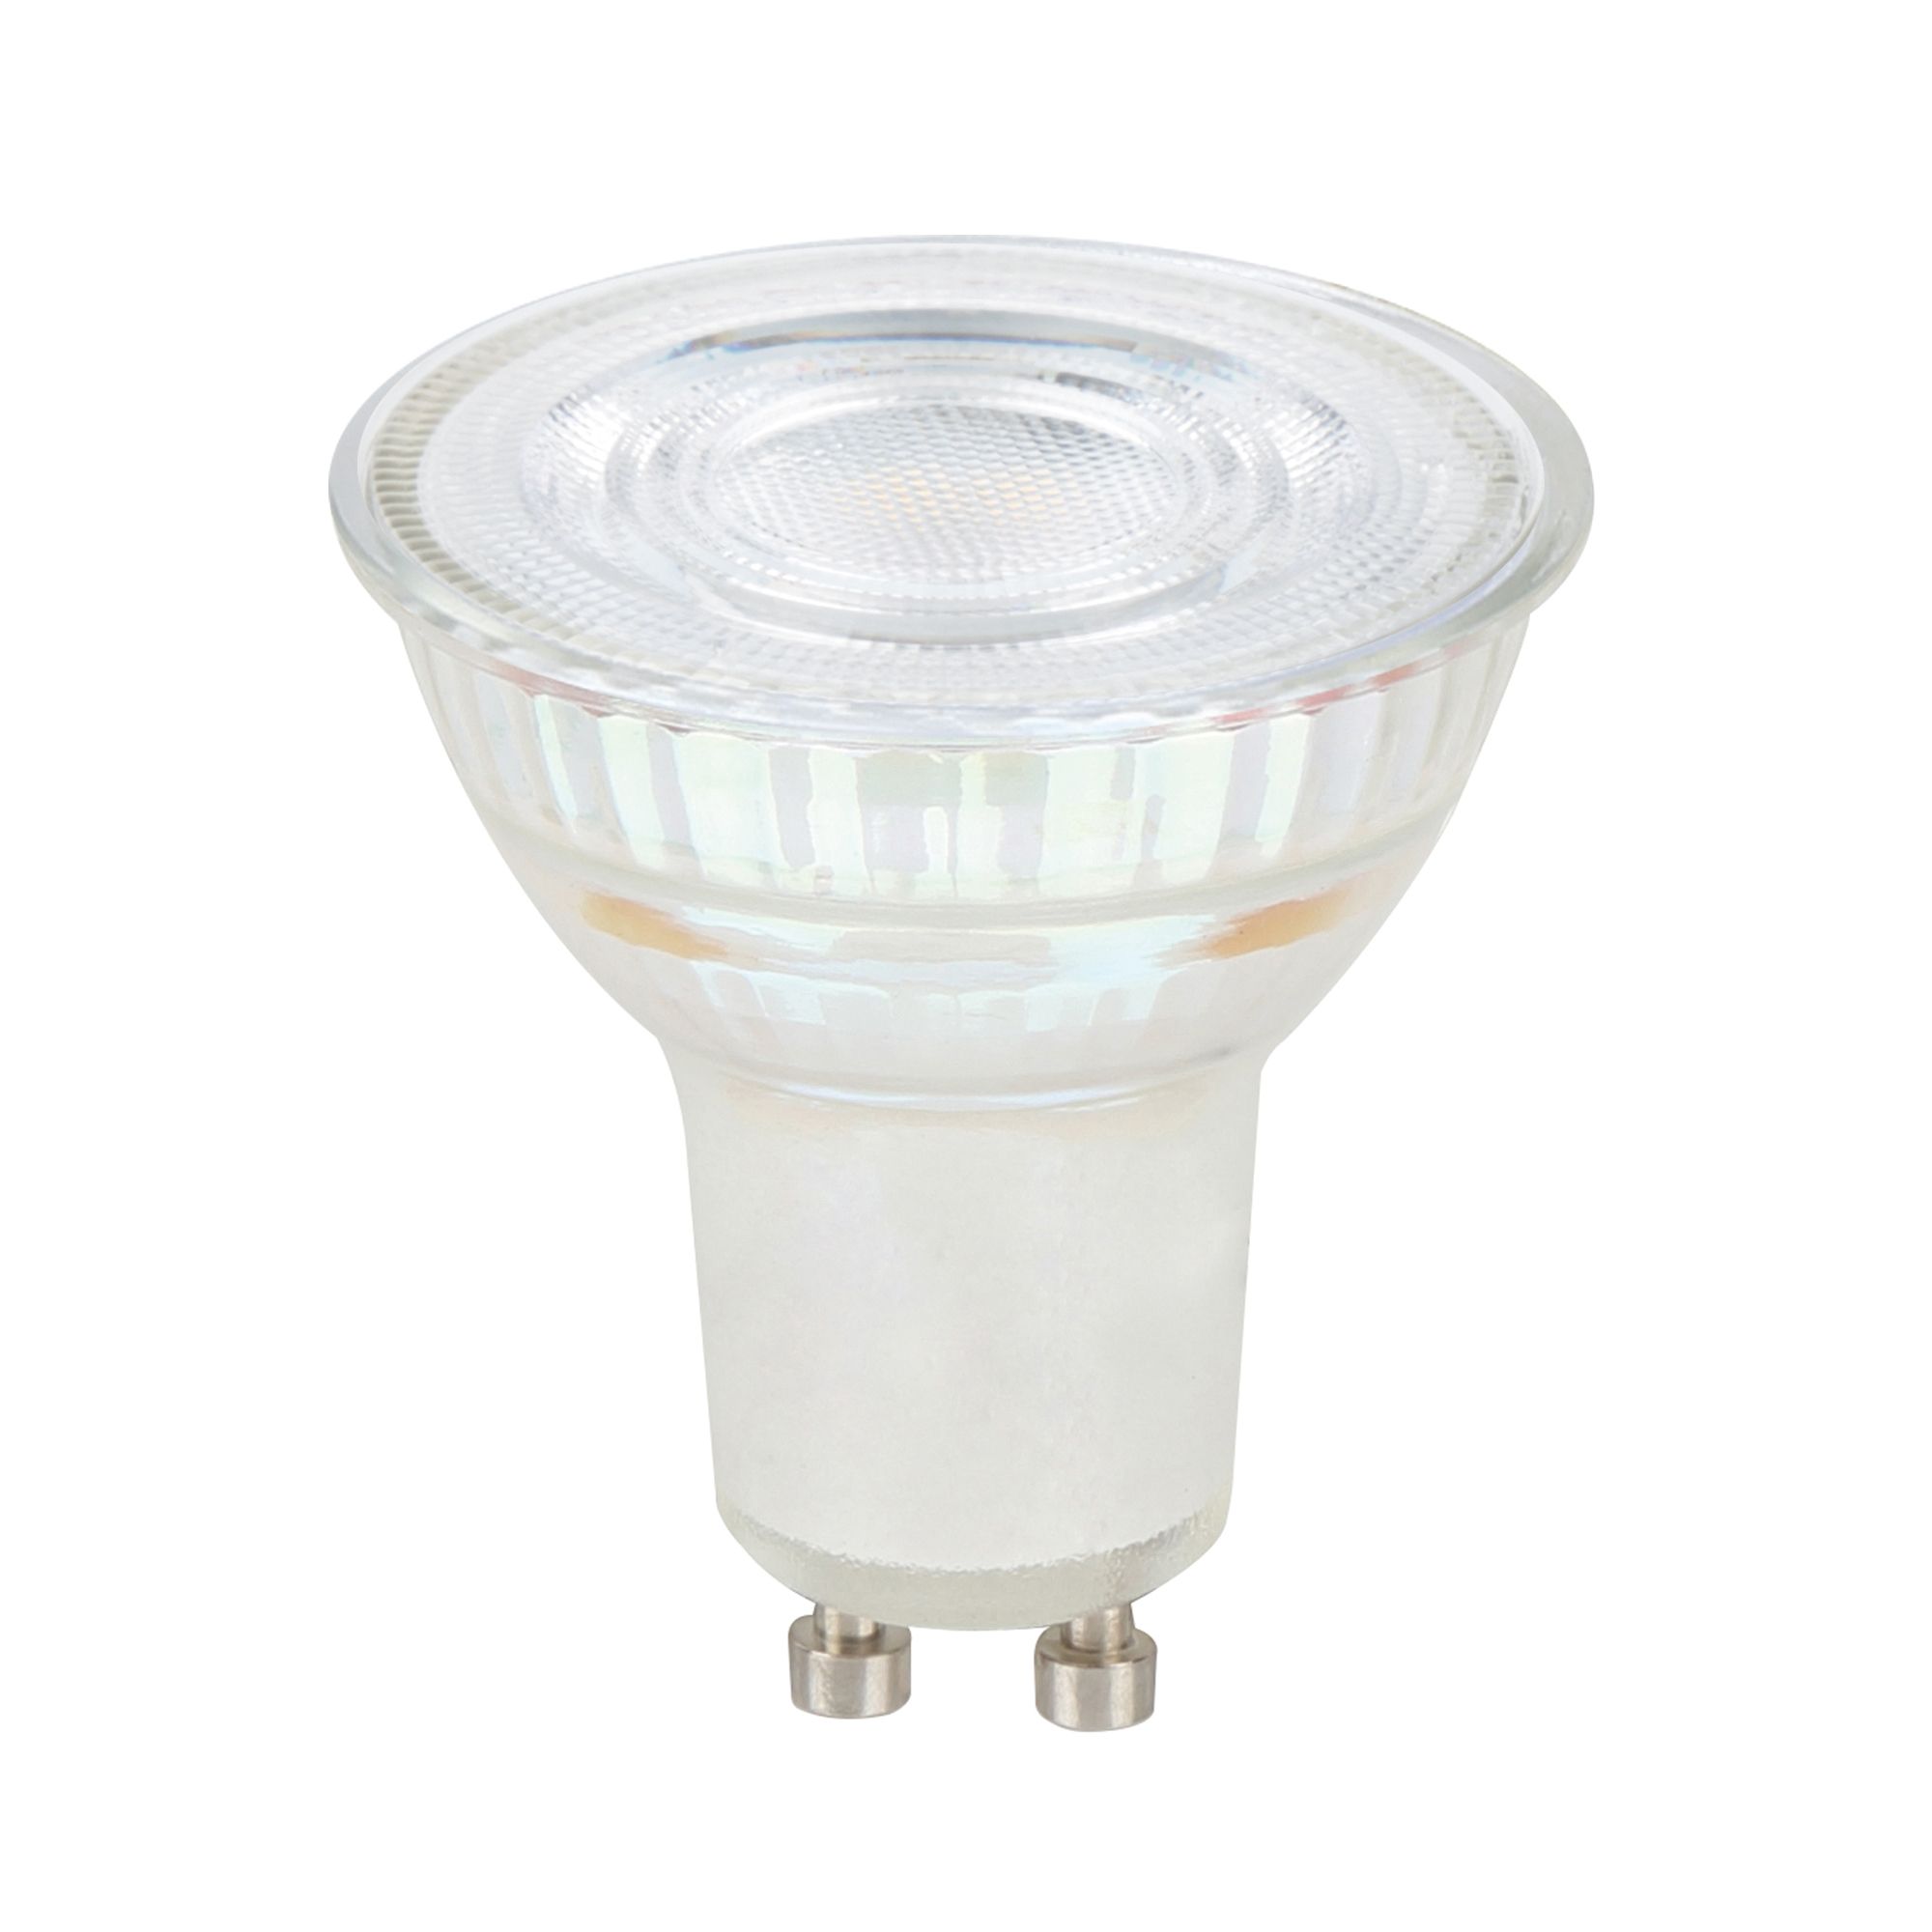 Easy Connect MR20 spot LED GU10 4W bleu dimmable